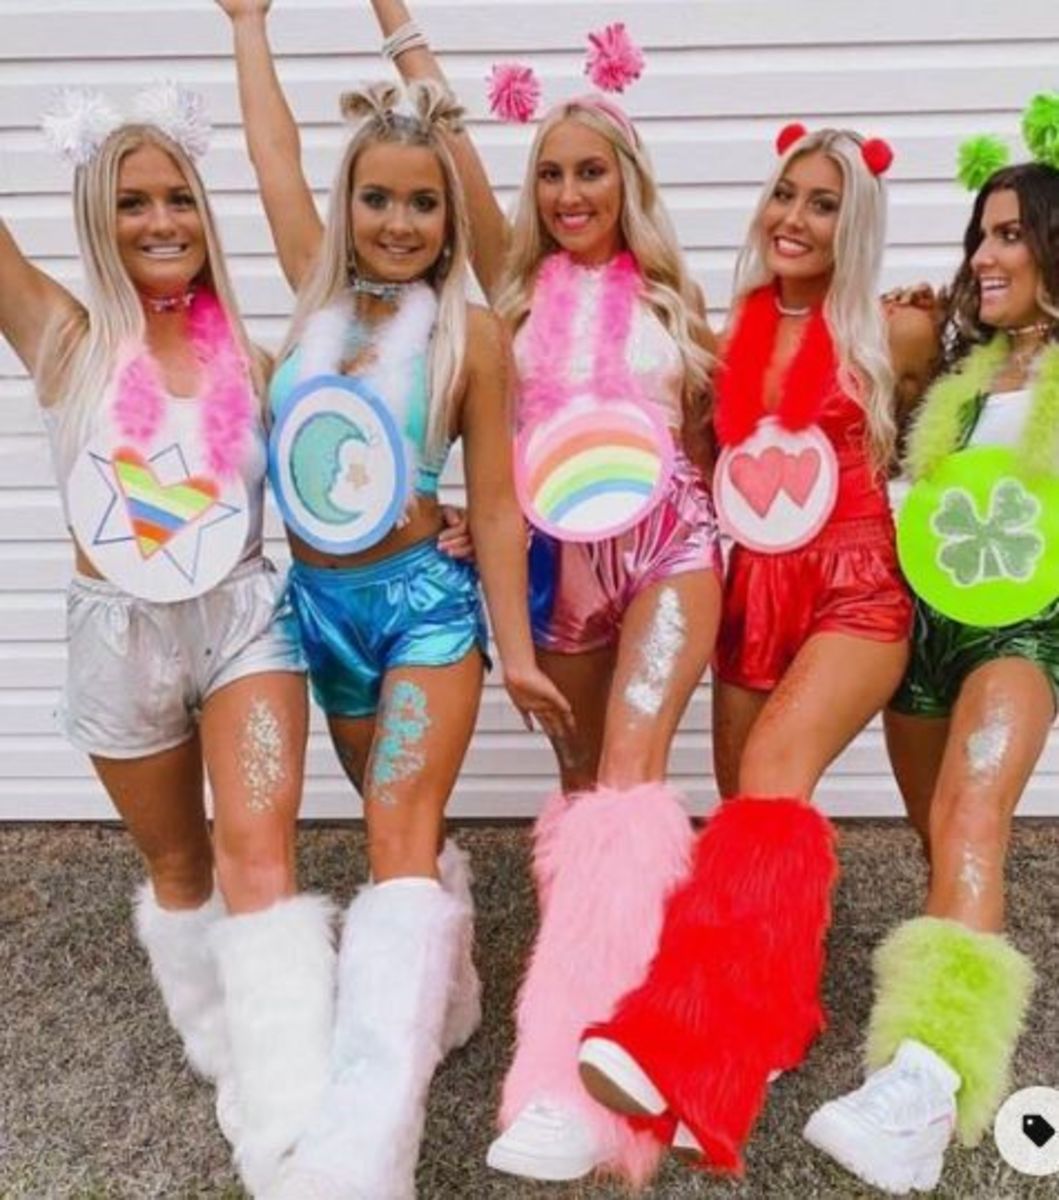 The COOLEST Halloween Costume Ideas for Teens, Tween Fashion